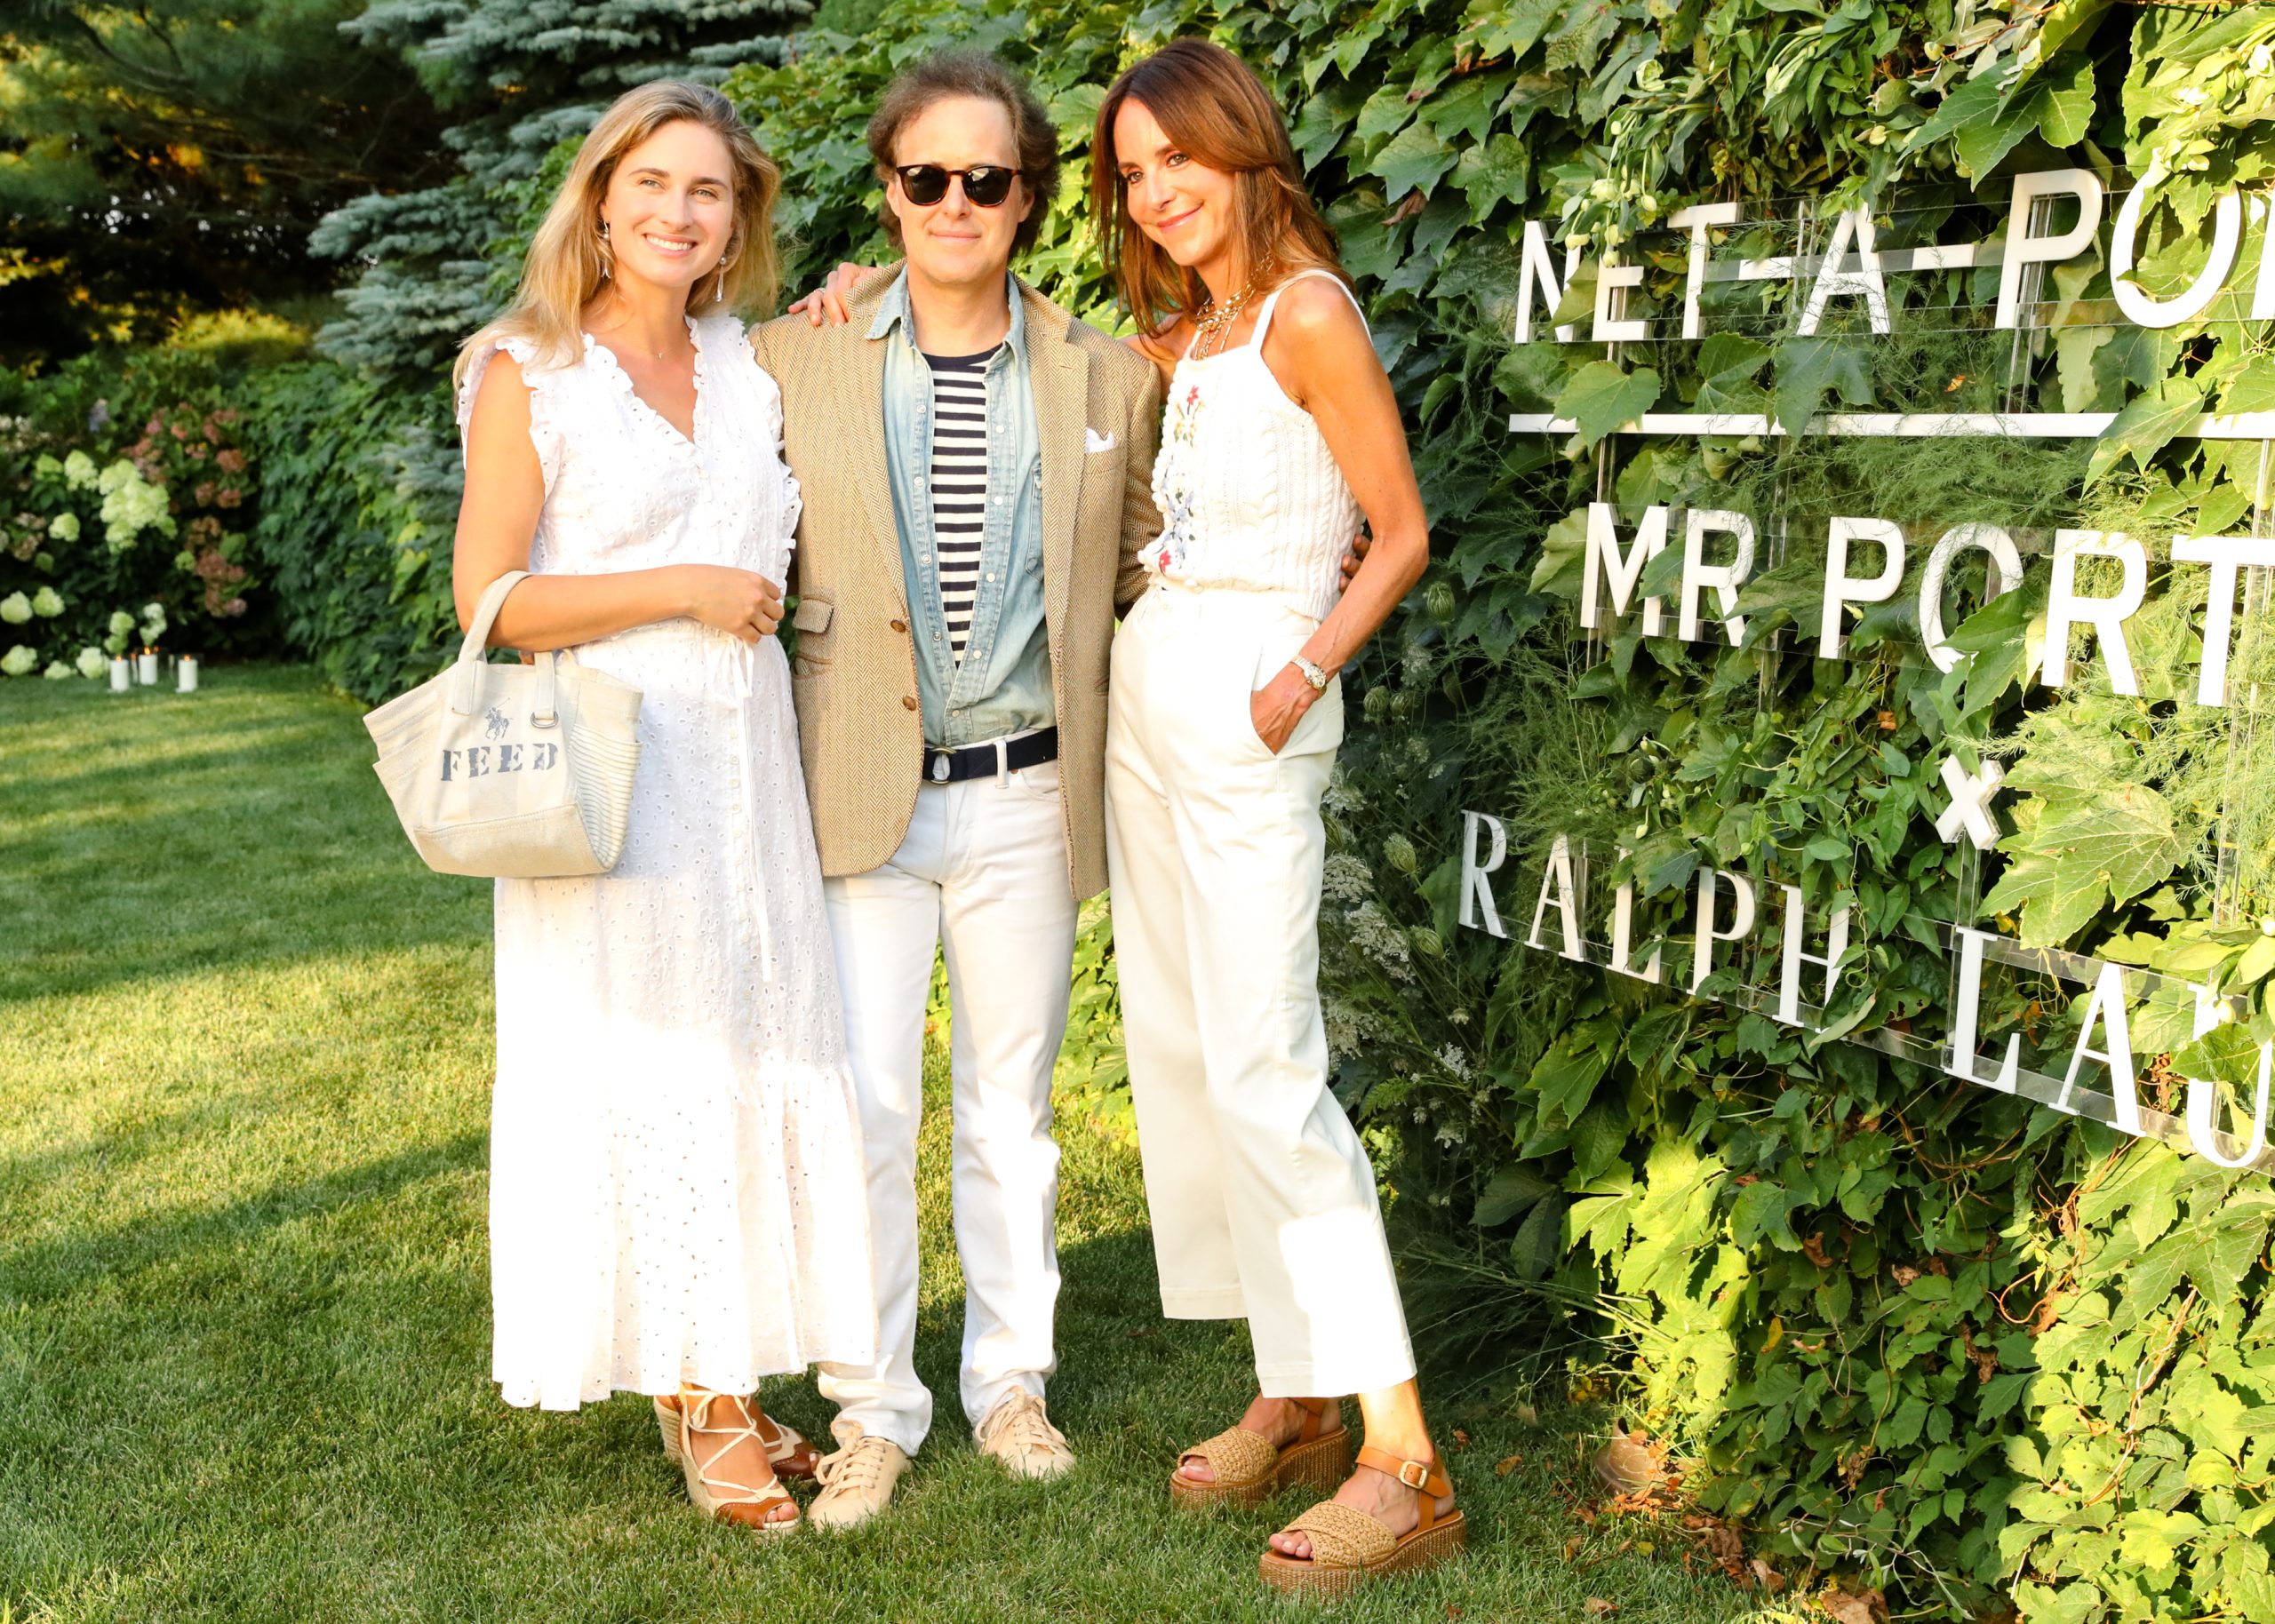 Net-A-Porter and Mr Porter Celebrate Ralph Lauren with A Cocktail Party out East